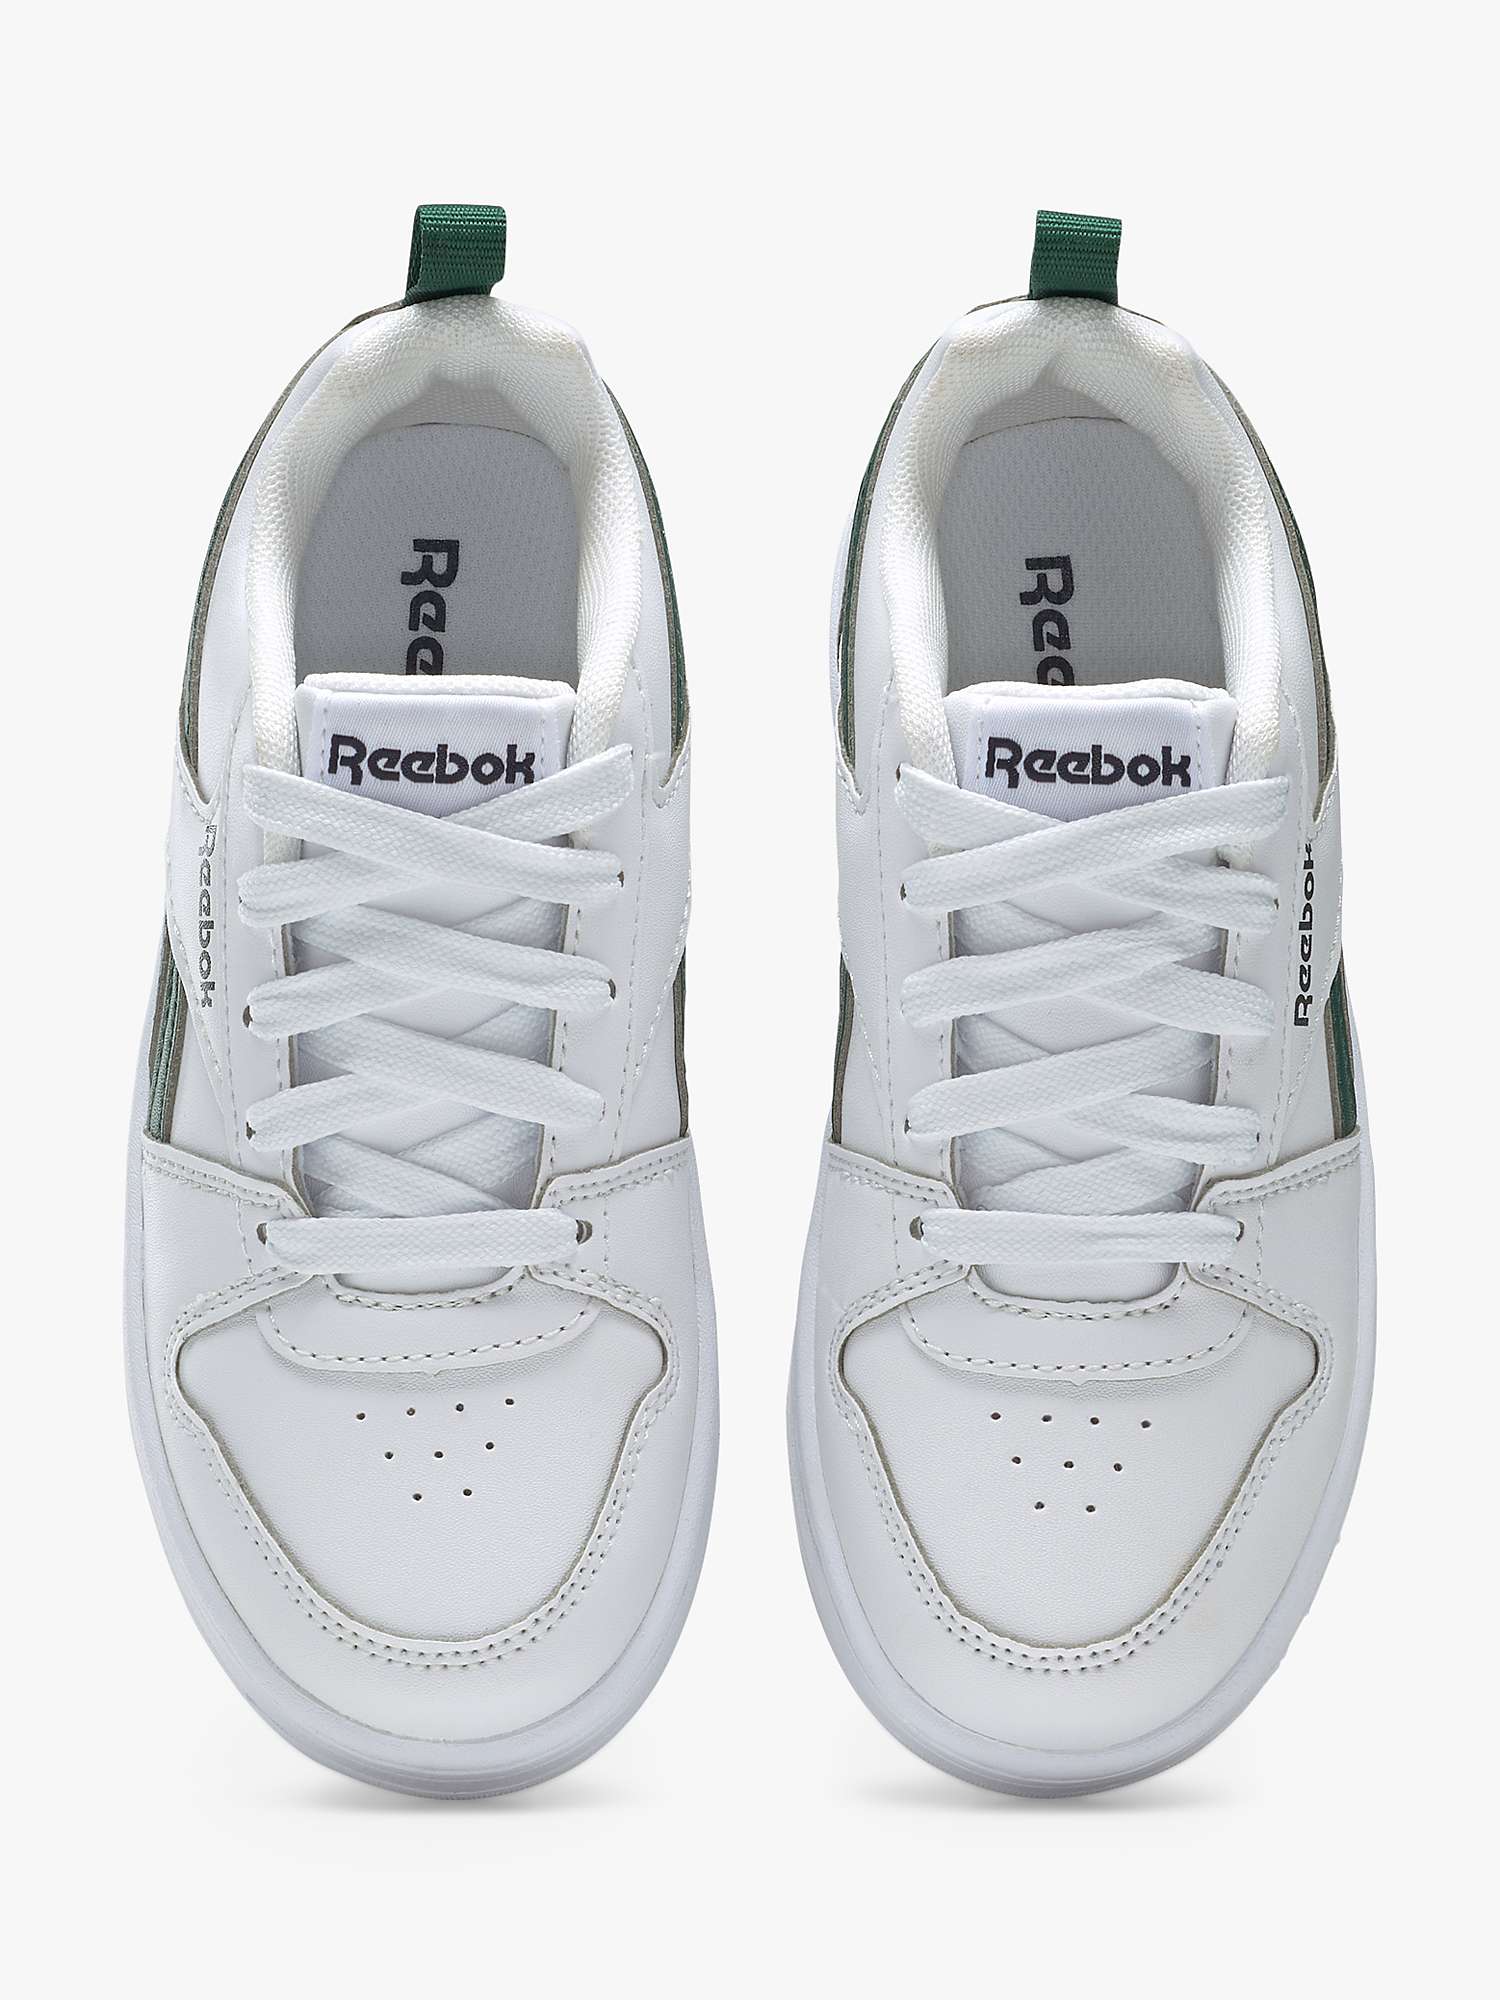 Buy Reebok Kids' Royal Prime 2.0 Lace Up Trainers Online at johnlewis.com